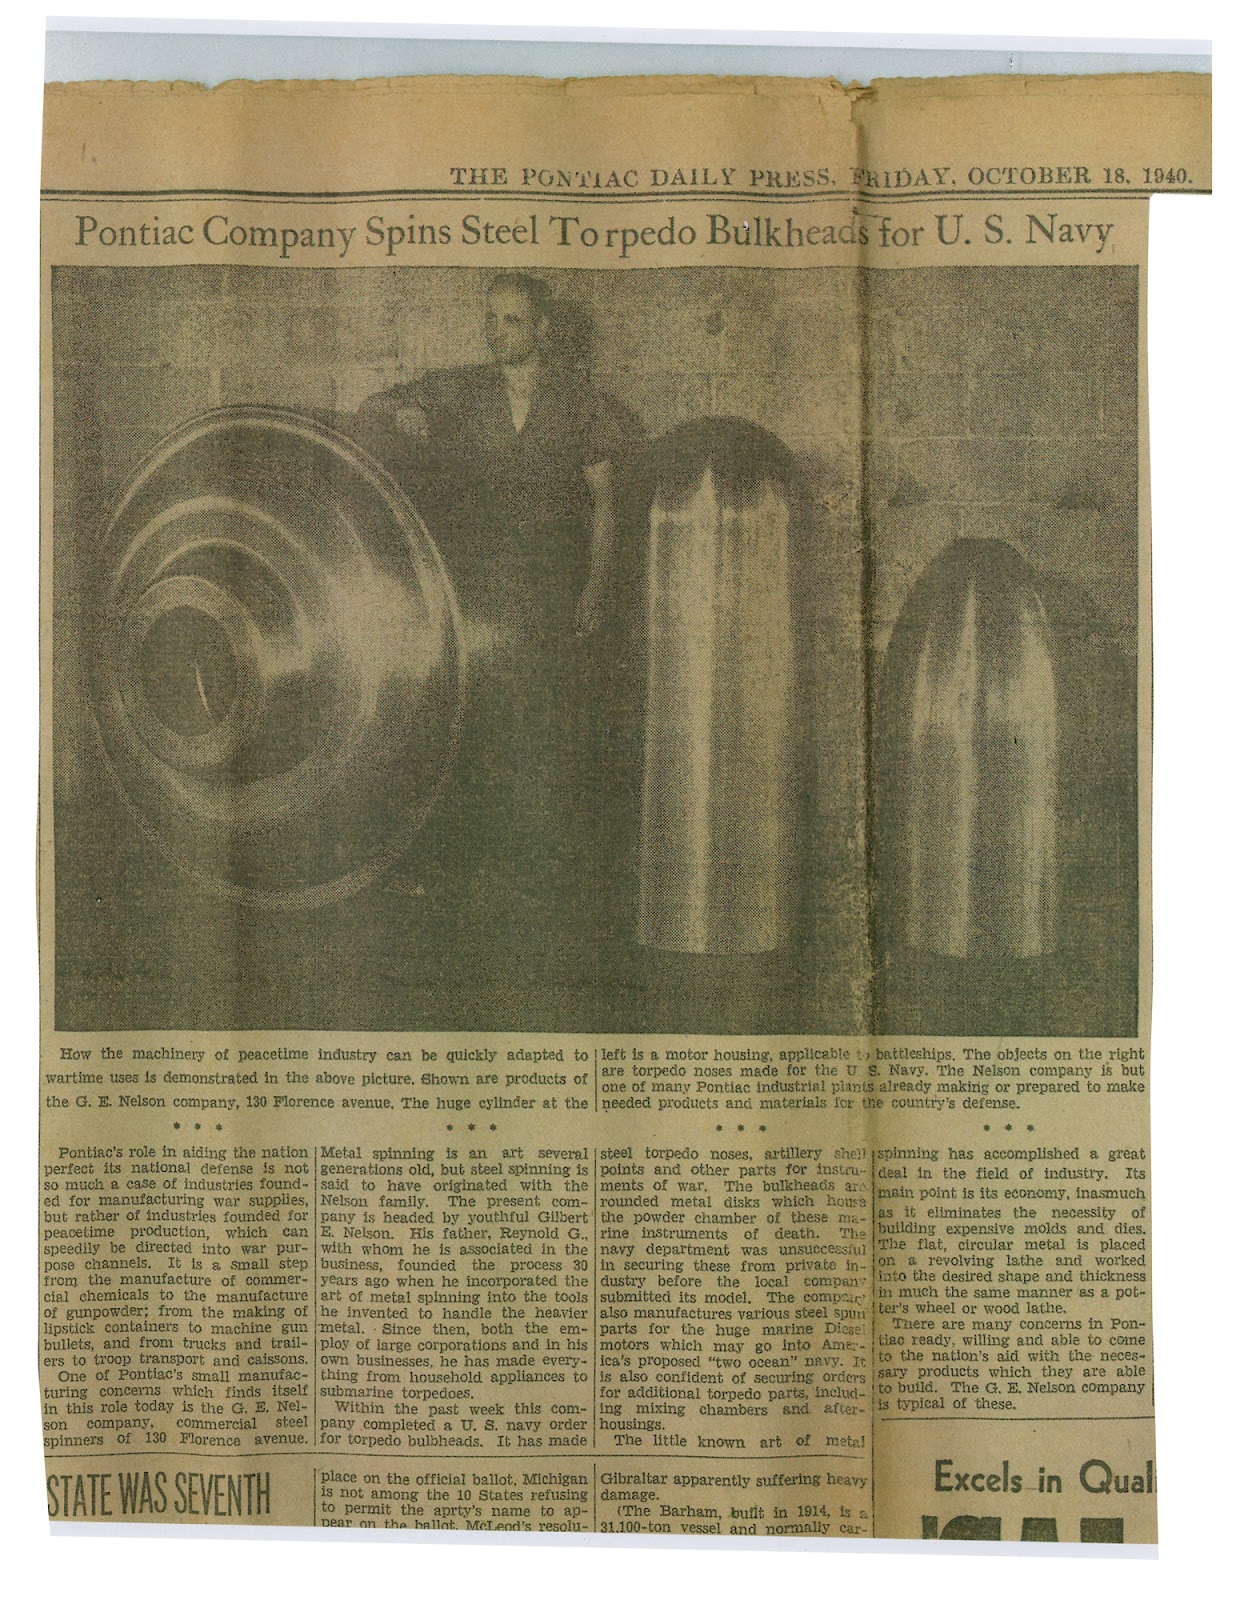 A newspaper page dated October 18, 1940 from the Pontiac Daily Press on the G. E. Nelson Company’s business creating bulkheads for the U.S. Navy. This story was published four years before the company would be approached for their assistance in the Manhattan Project.